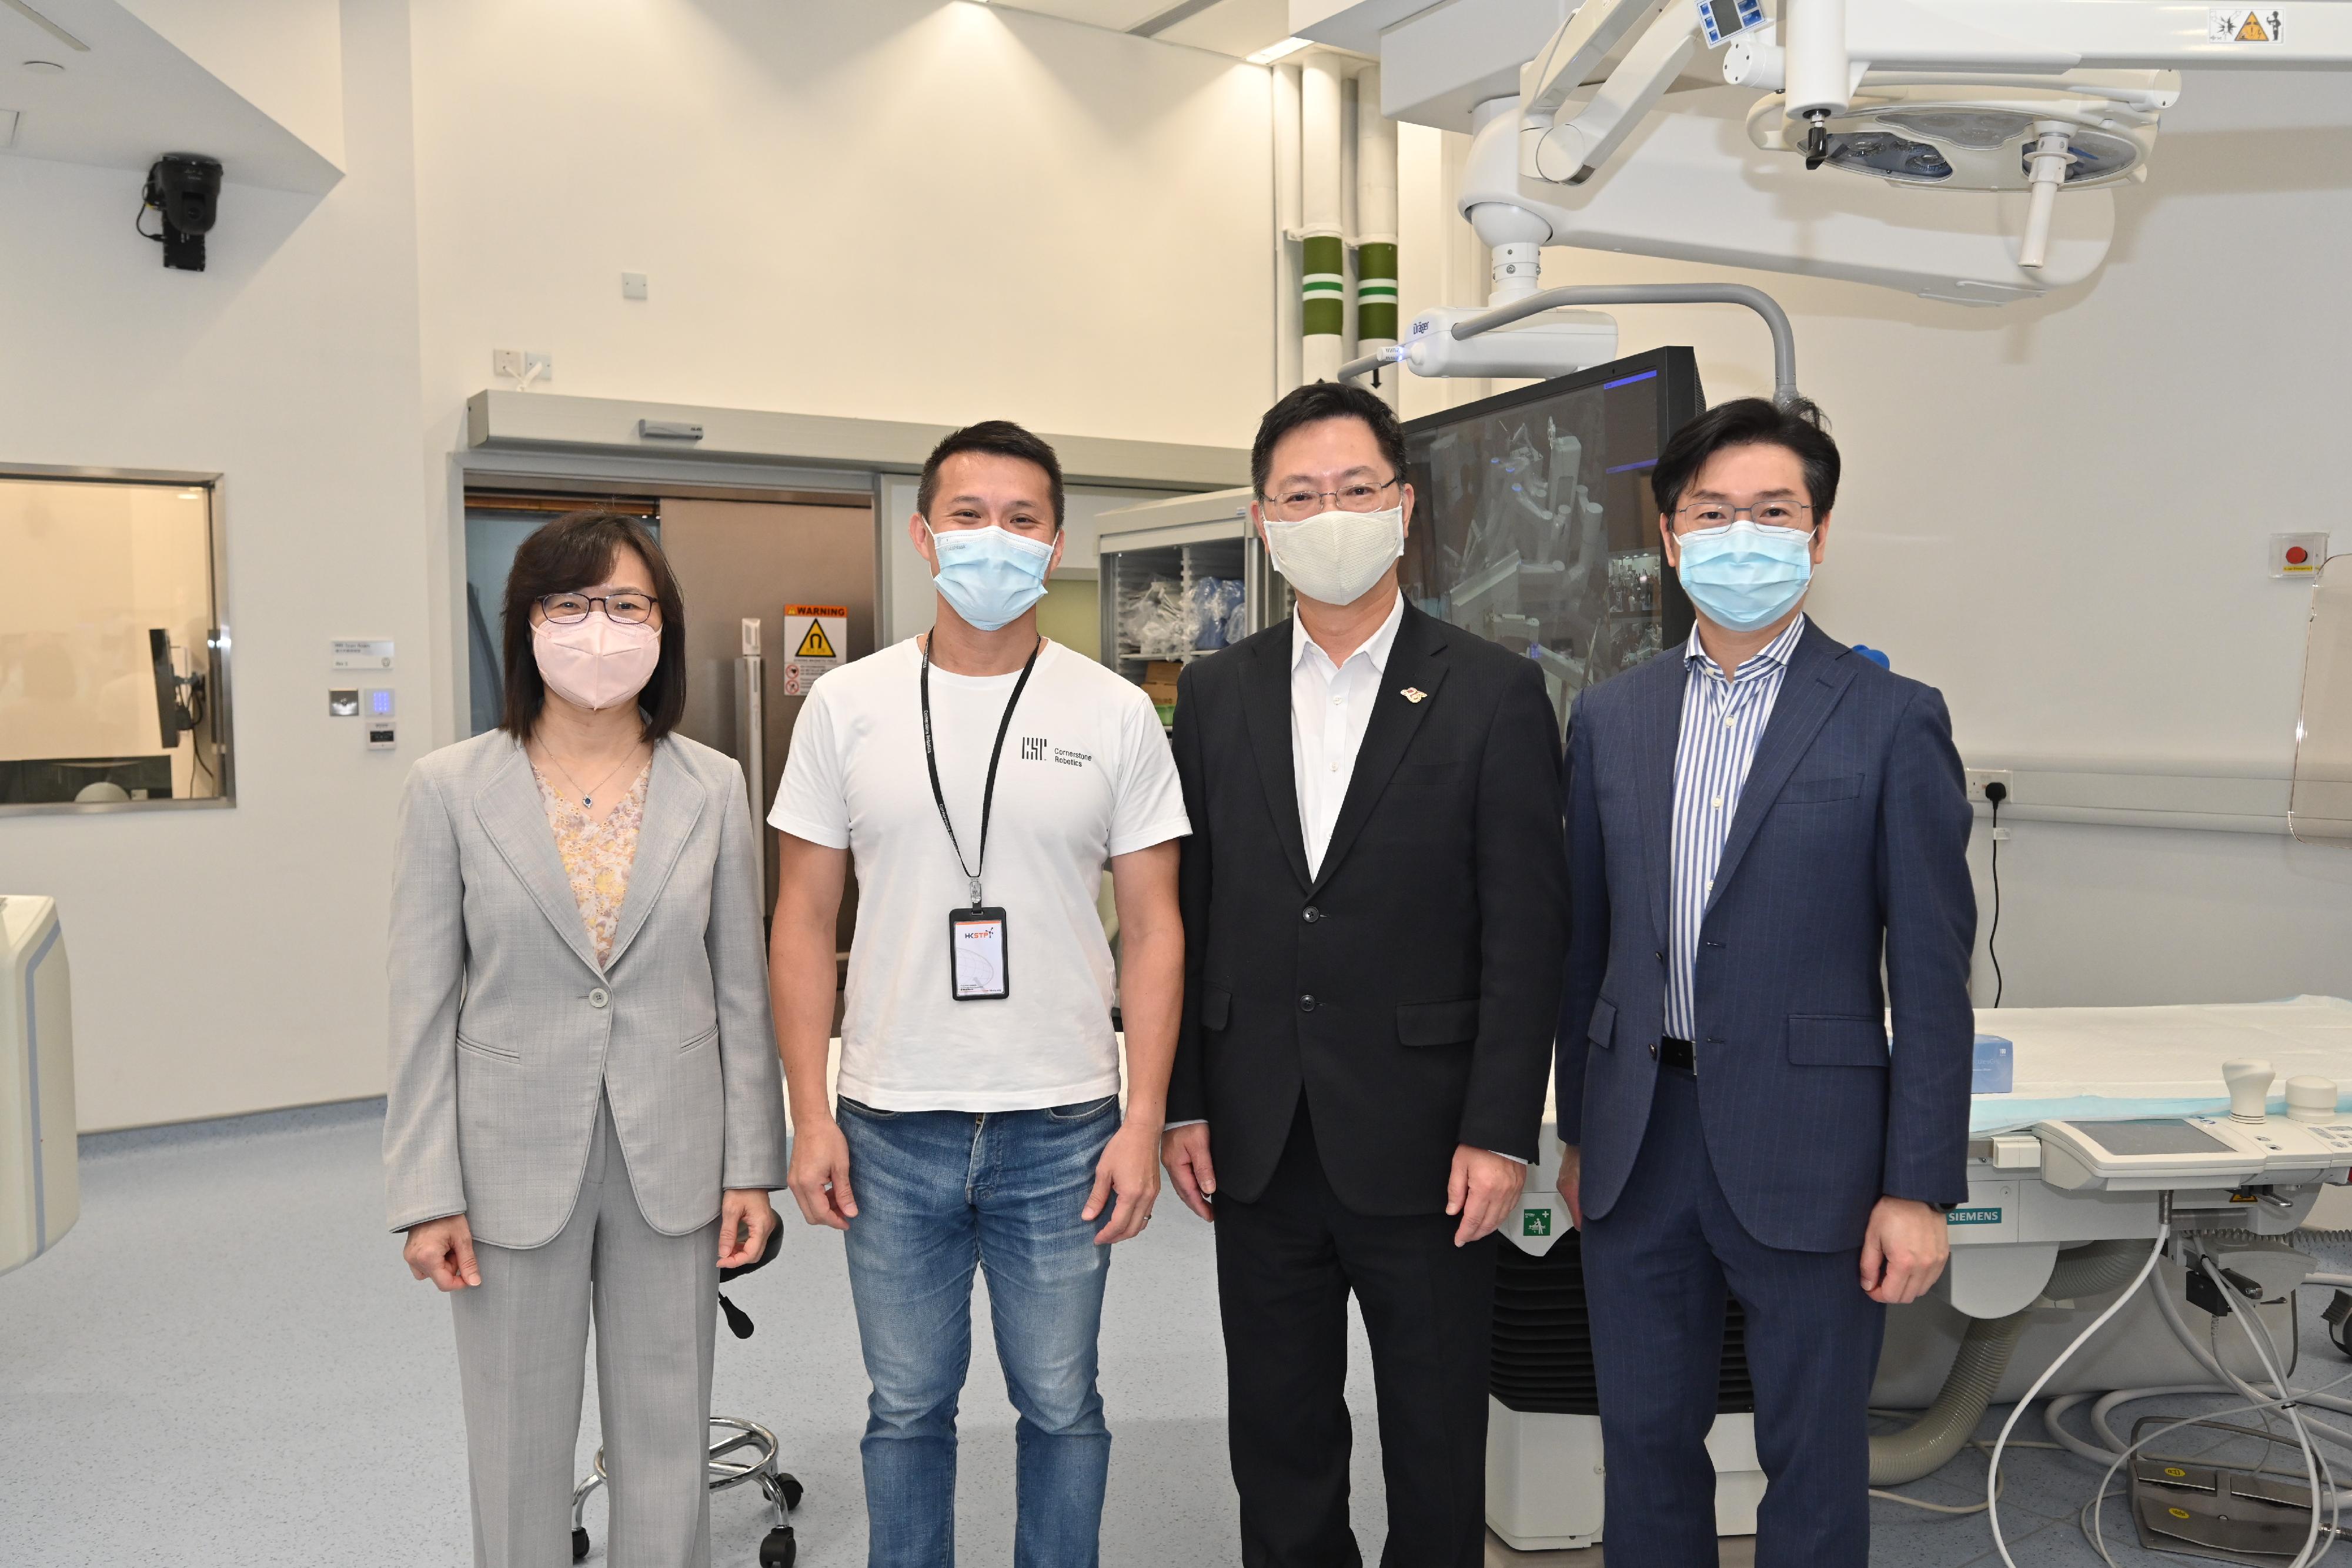 The Secretary for Innovation and Technology, Mr Alfred Sit (second right), together with the Commissioner for Innovation and Technology, Ms Rebecca Pun (first left), is pictured with the directors of the Multi-Scale Medical Robotics Center, Professor Philip Chiu (first right) from the Faculty of Medicine of the Chinese University of Hong Kong (CUHK) and Professor Samuel Au (second left) from the Department of Mechanical and Automation Engineering of CUHK, during the visit to the Multi-Scale Medical Robotics Center today (June 14).